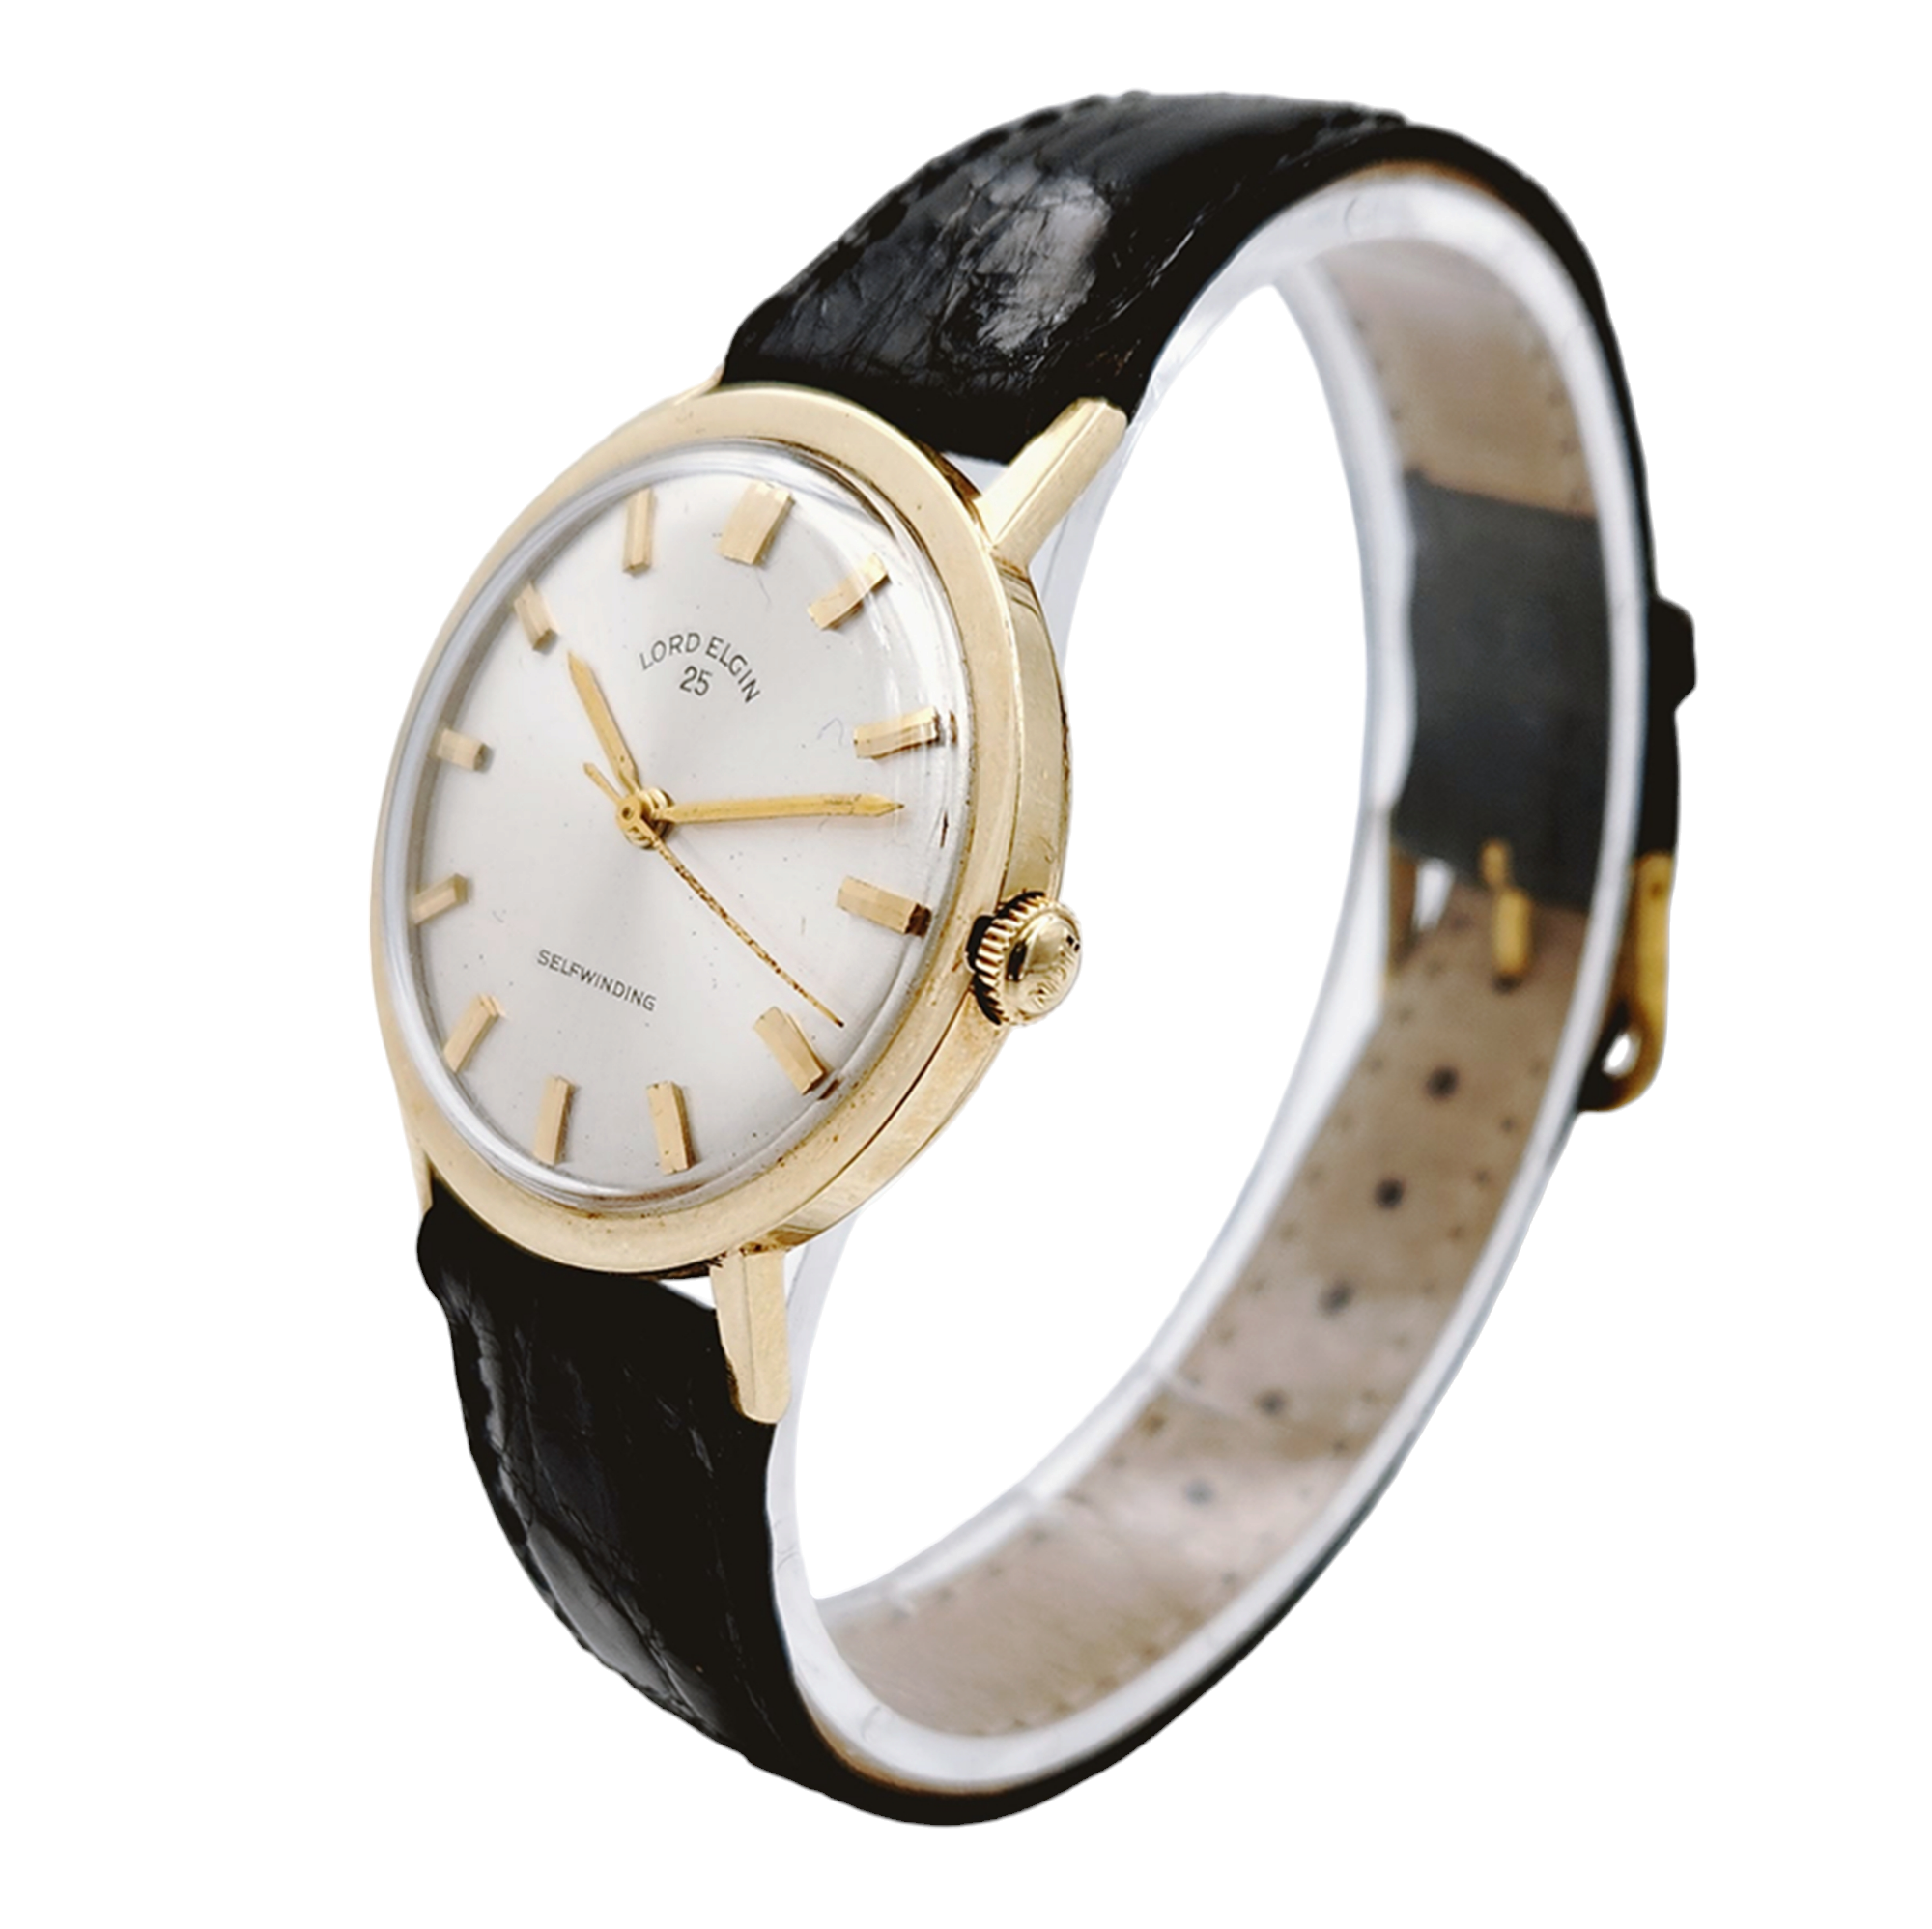 1950's Men's Lord Elgin 25 Vintage 34mm - 14K Yellow Gold Automatic Watch with Black Leather Band and Silver Dial. (Pre-Owned)